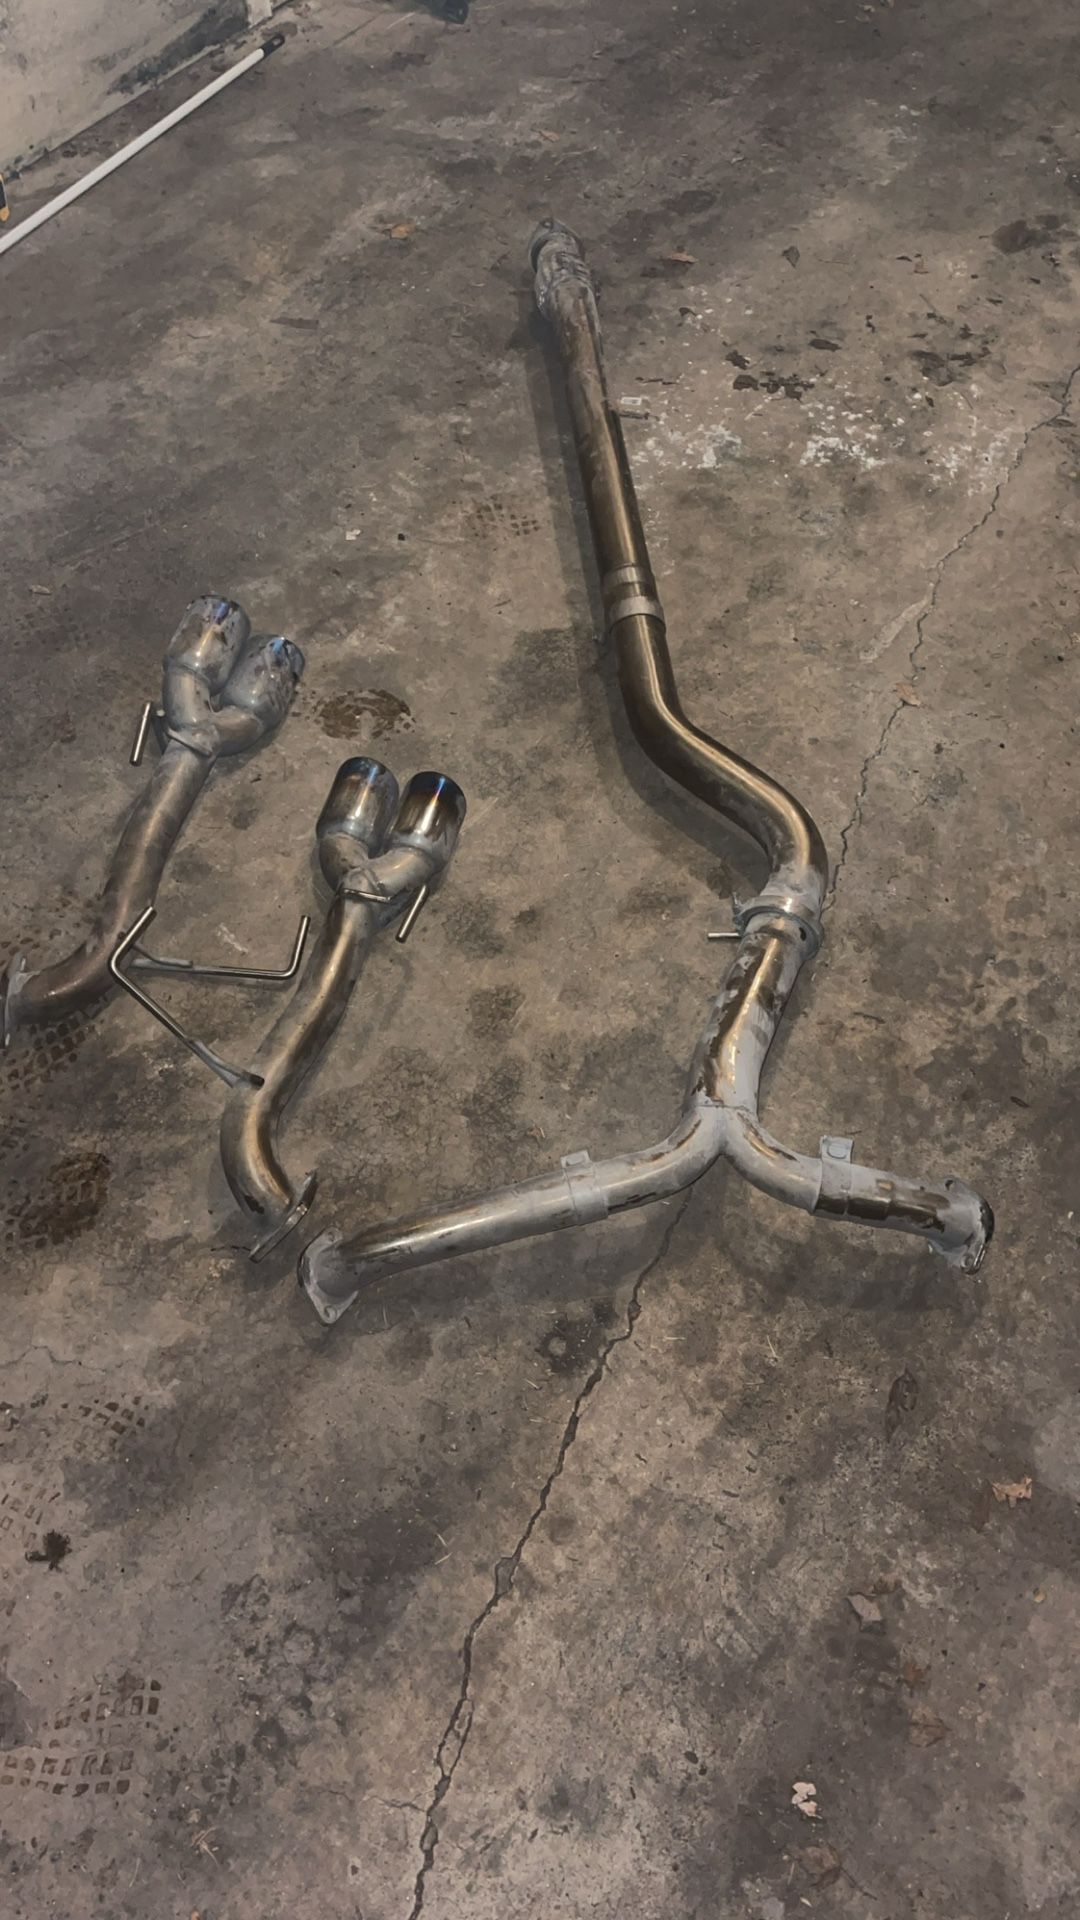 2017 Subaru Wrx Sti SRS Exhaust System Mid And Mufflers Pipes